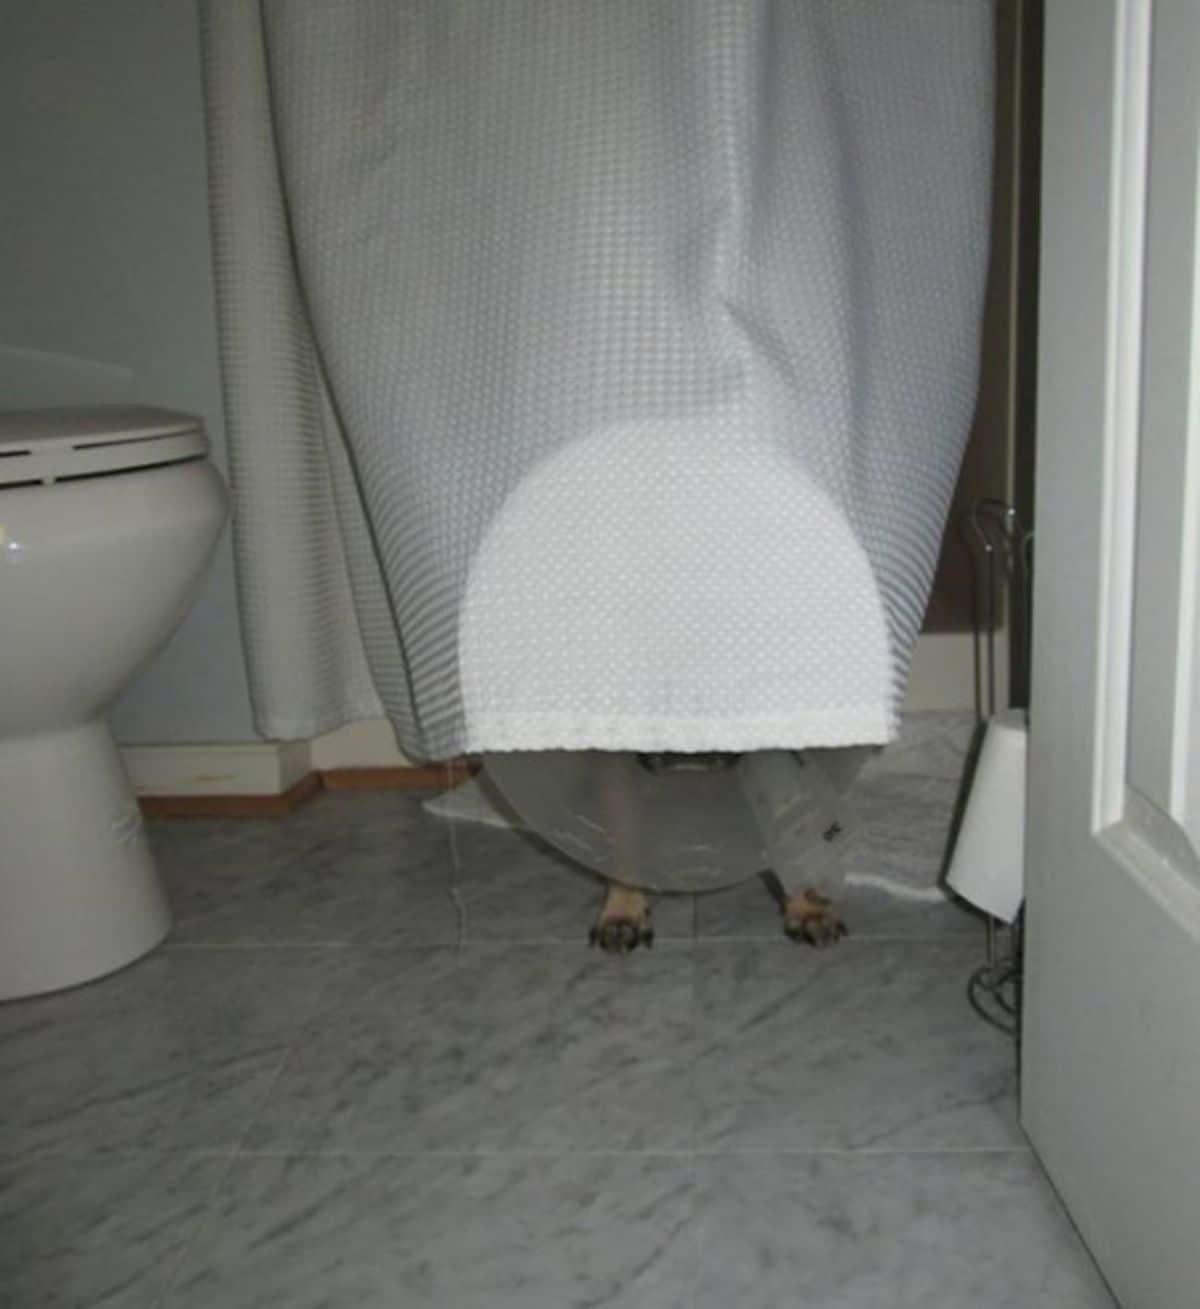 brown dog wearing a plastic elizabethan cone standing in a bathroom with the top half covered behind a white curtain